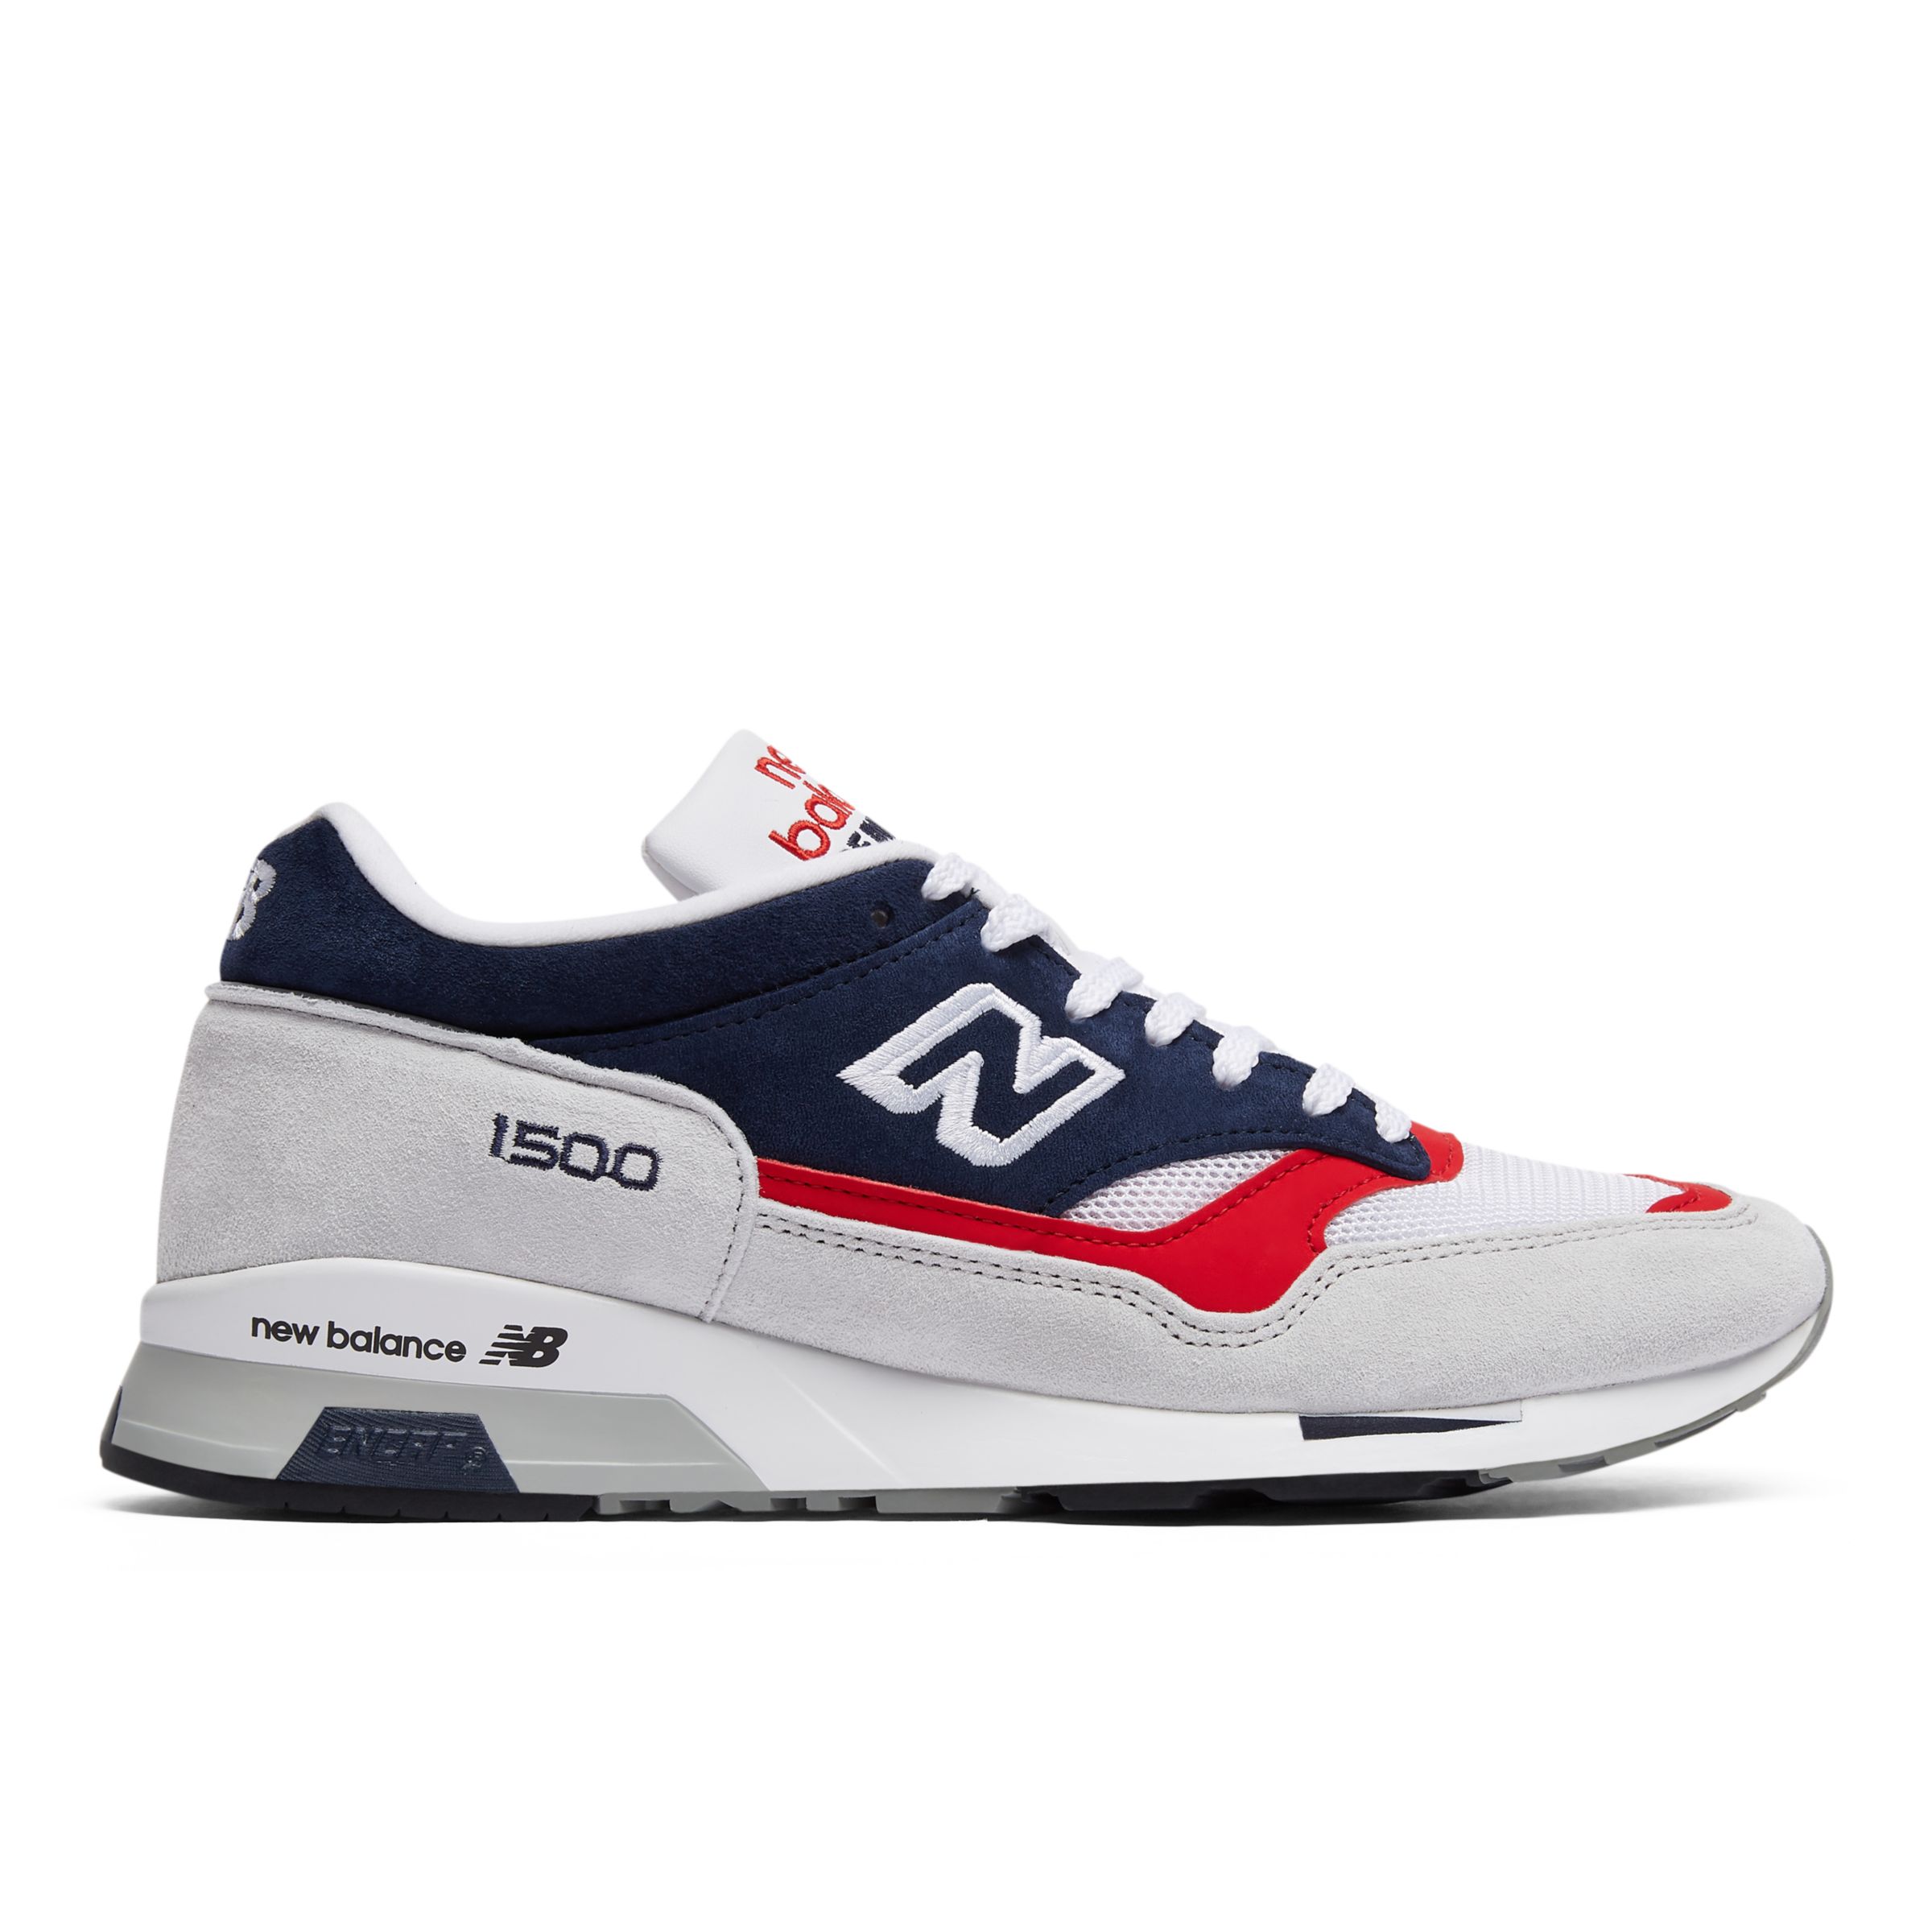 new balance made in england online shop